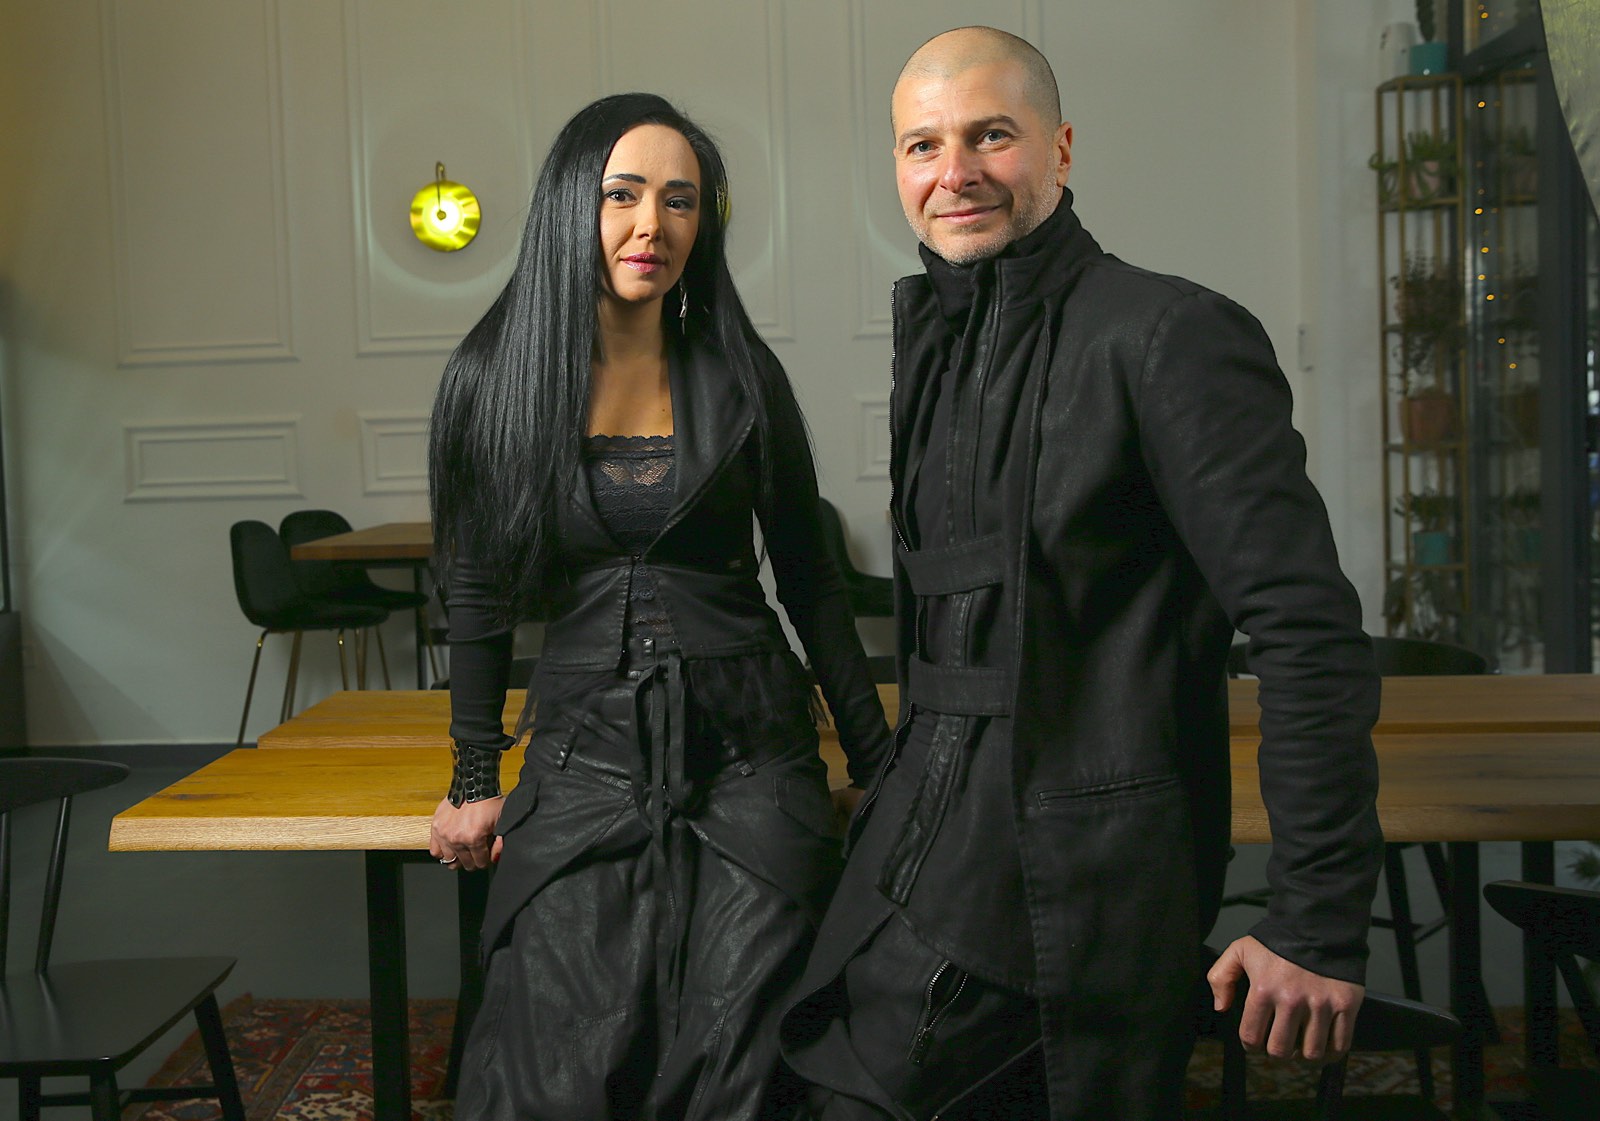 Plamen Russev with his wife Aniela